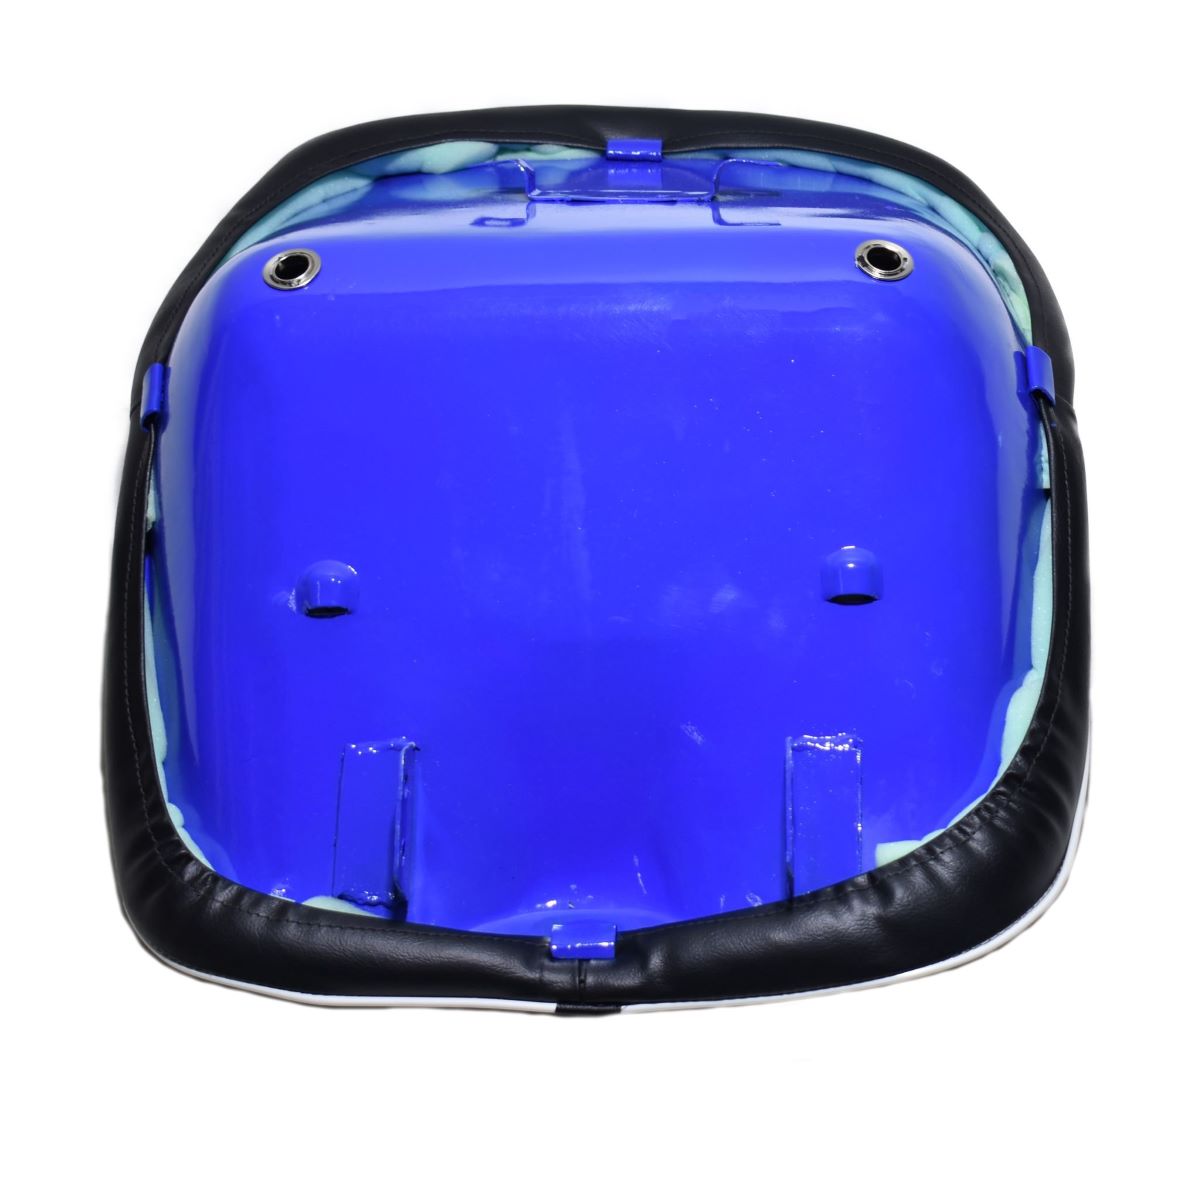 1421-611-001-00 / 1421-611-0010-0 / 142161100100 Chair Iseki TX, TU, TS, TL Extra info: Suitable for many models Iseki tractors All models of TX, TS, TL, TU series Look carefully at the dimensions, sometimes some adjustment needed Iseki TU: TU1400 TU1500 TU1600 TU1700 TU1900 TU2100 Iseki TU: (Landhope) TU120 TU125 TU127 TU130 TU135 TU137 TU140 TU145 TU147 TU150 TU155 TU157 TU160 TU165 TU167 TU170 TU175 TU177 Iseki TX: TX10 TX155 TX1000 TX500 TX1 TX500 TX TX2140 TX2160 Iseki TS: TS1610 TS1700 TS1910 TS2200 TS2202 TS2205 TS2210 TS2220 Iseki TL: TL1900 TL1901 TL2100 TL2101 TL2300 TL2301 TL2500 TL2501 TL2700 TL2701 TL2701 TL470mm2900 Dimensions